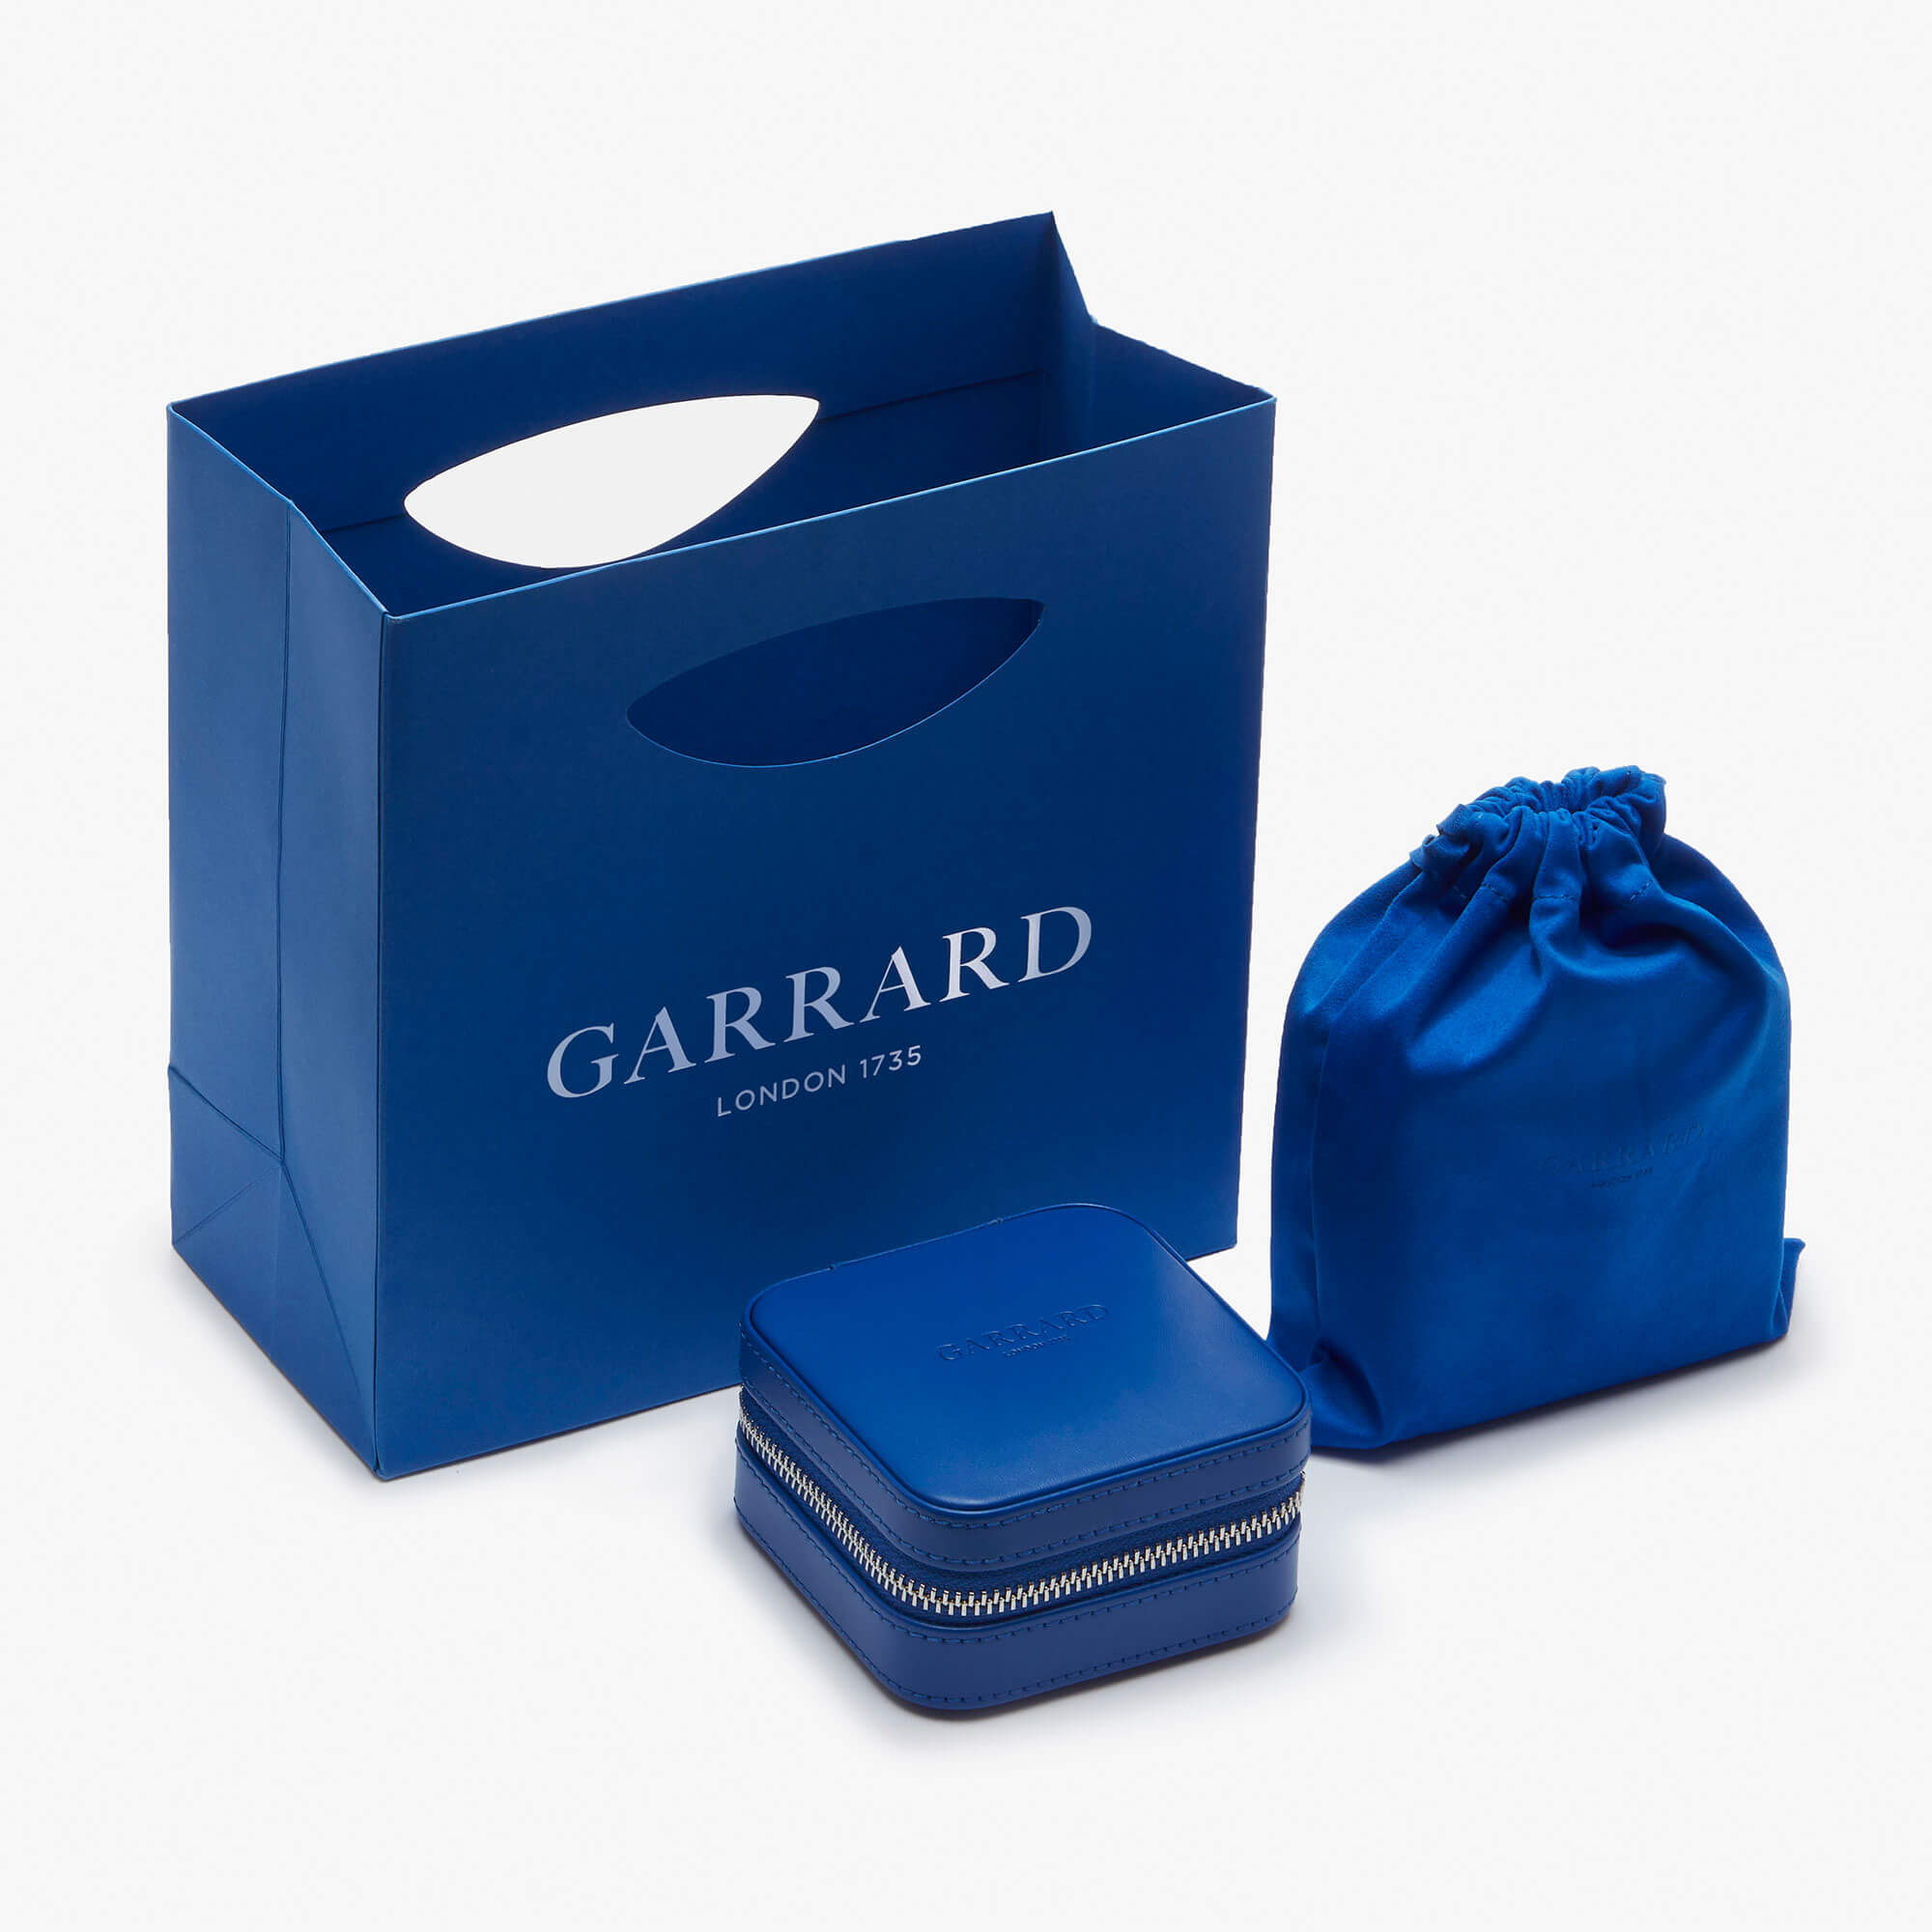 Garrard sustainable Royal Blue jewellery boxes packaging paper bag and dust bag